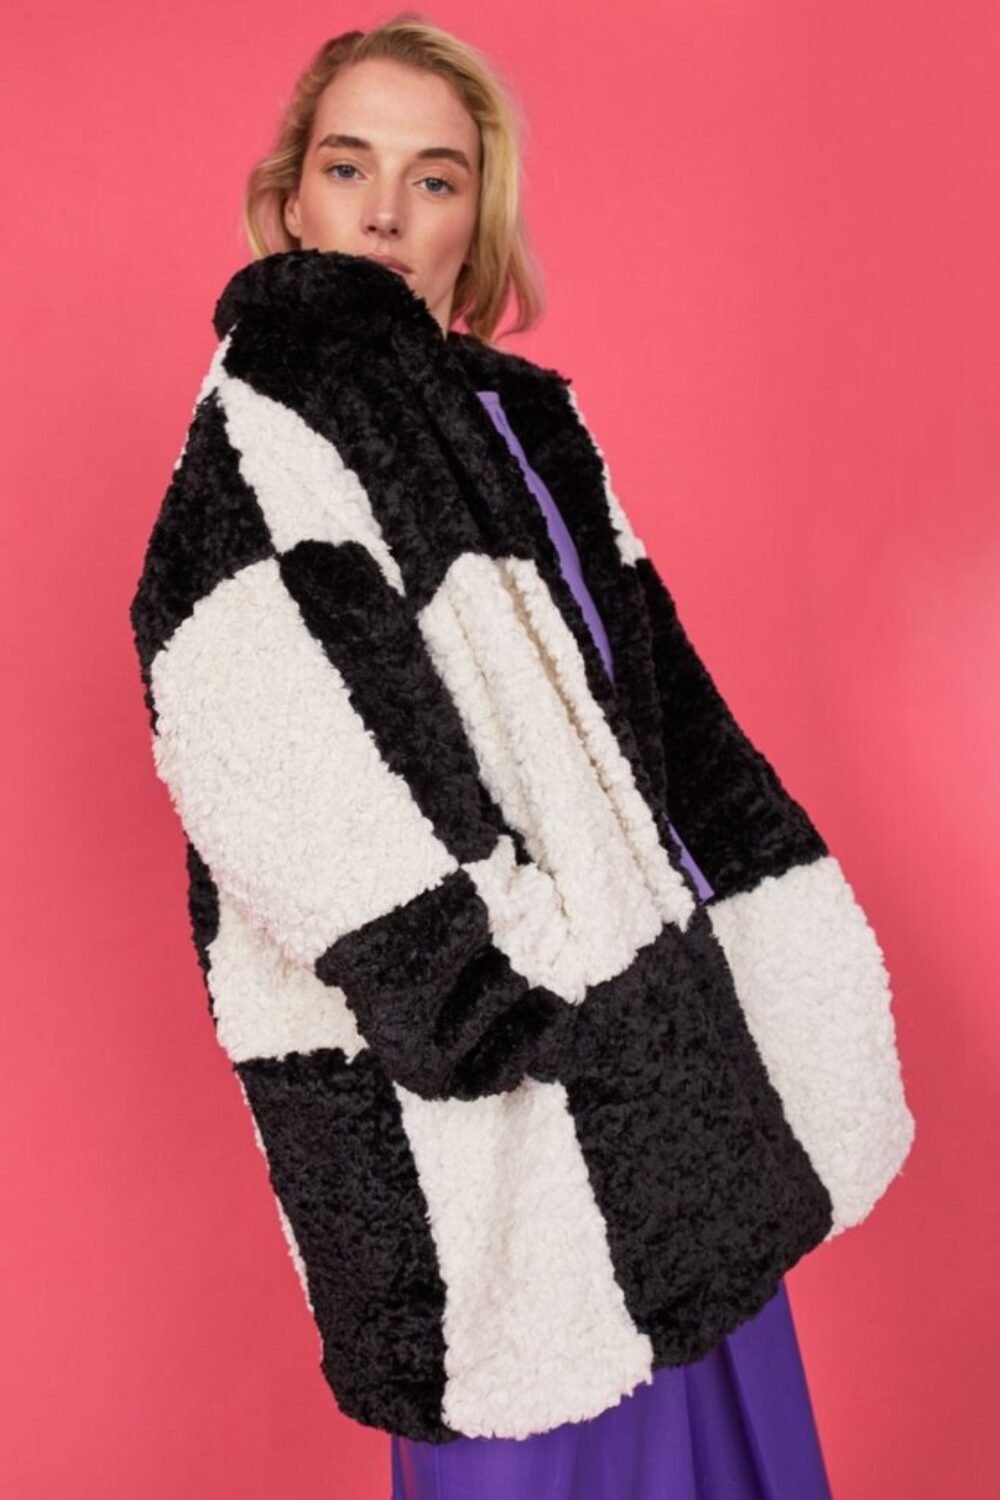 Shop Lux Oversized Black and White Midi Checkered Coat and women's luxury and designer clothes at www.lux-apparel.co.uk